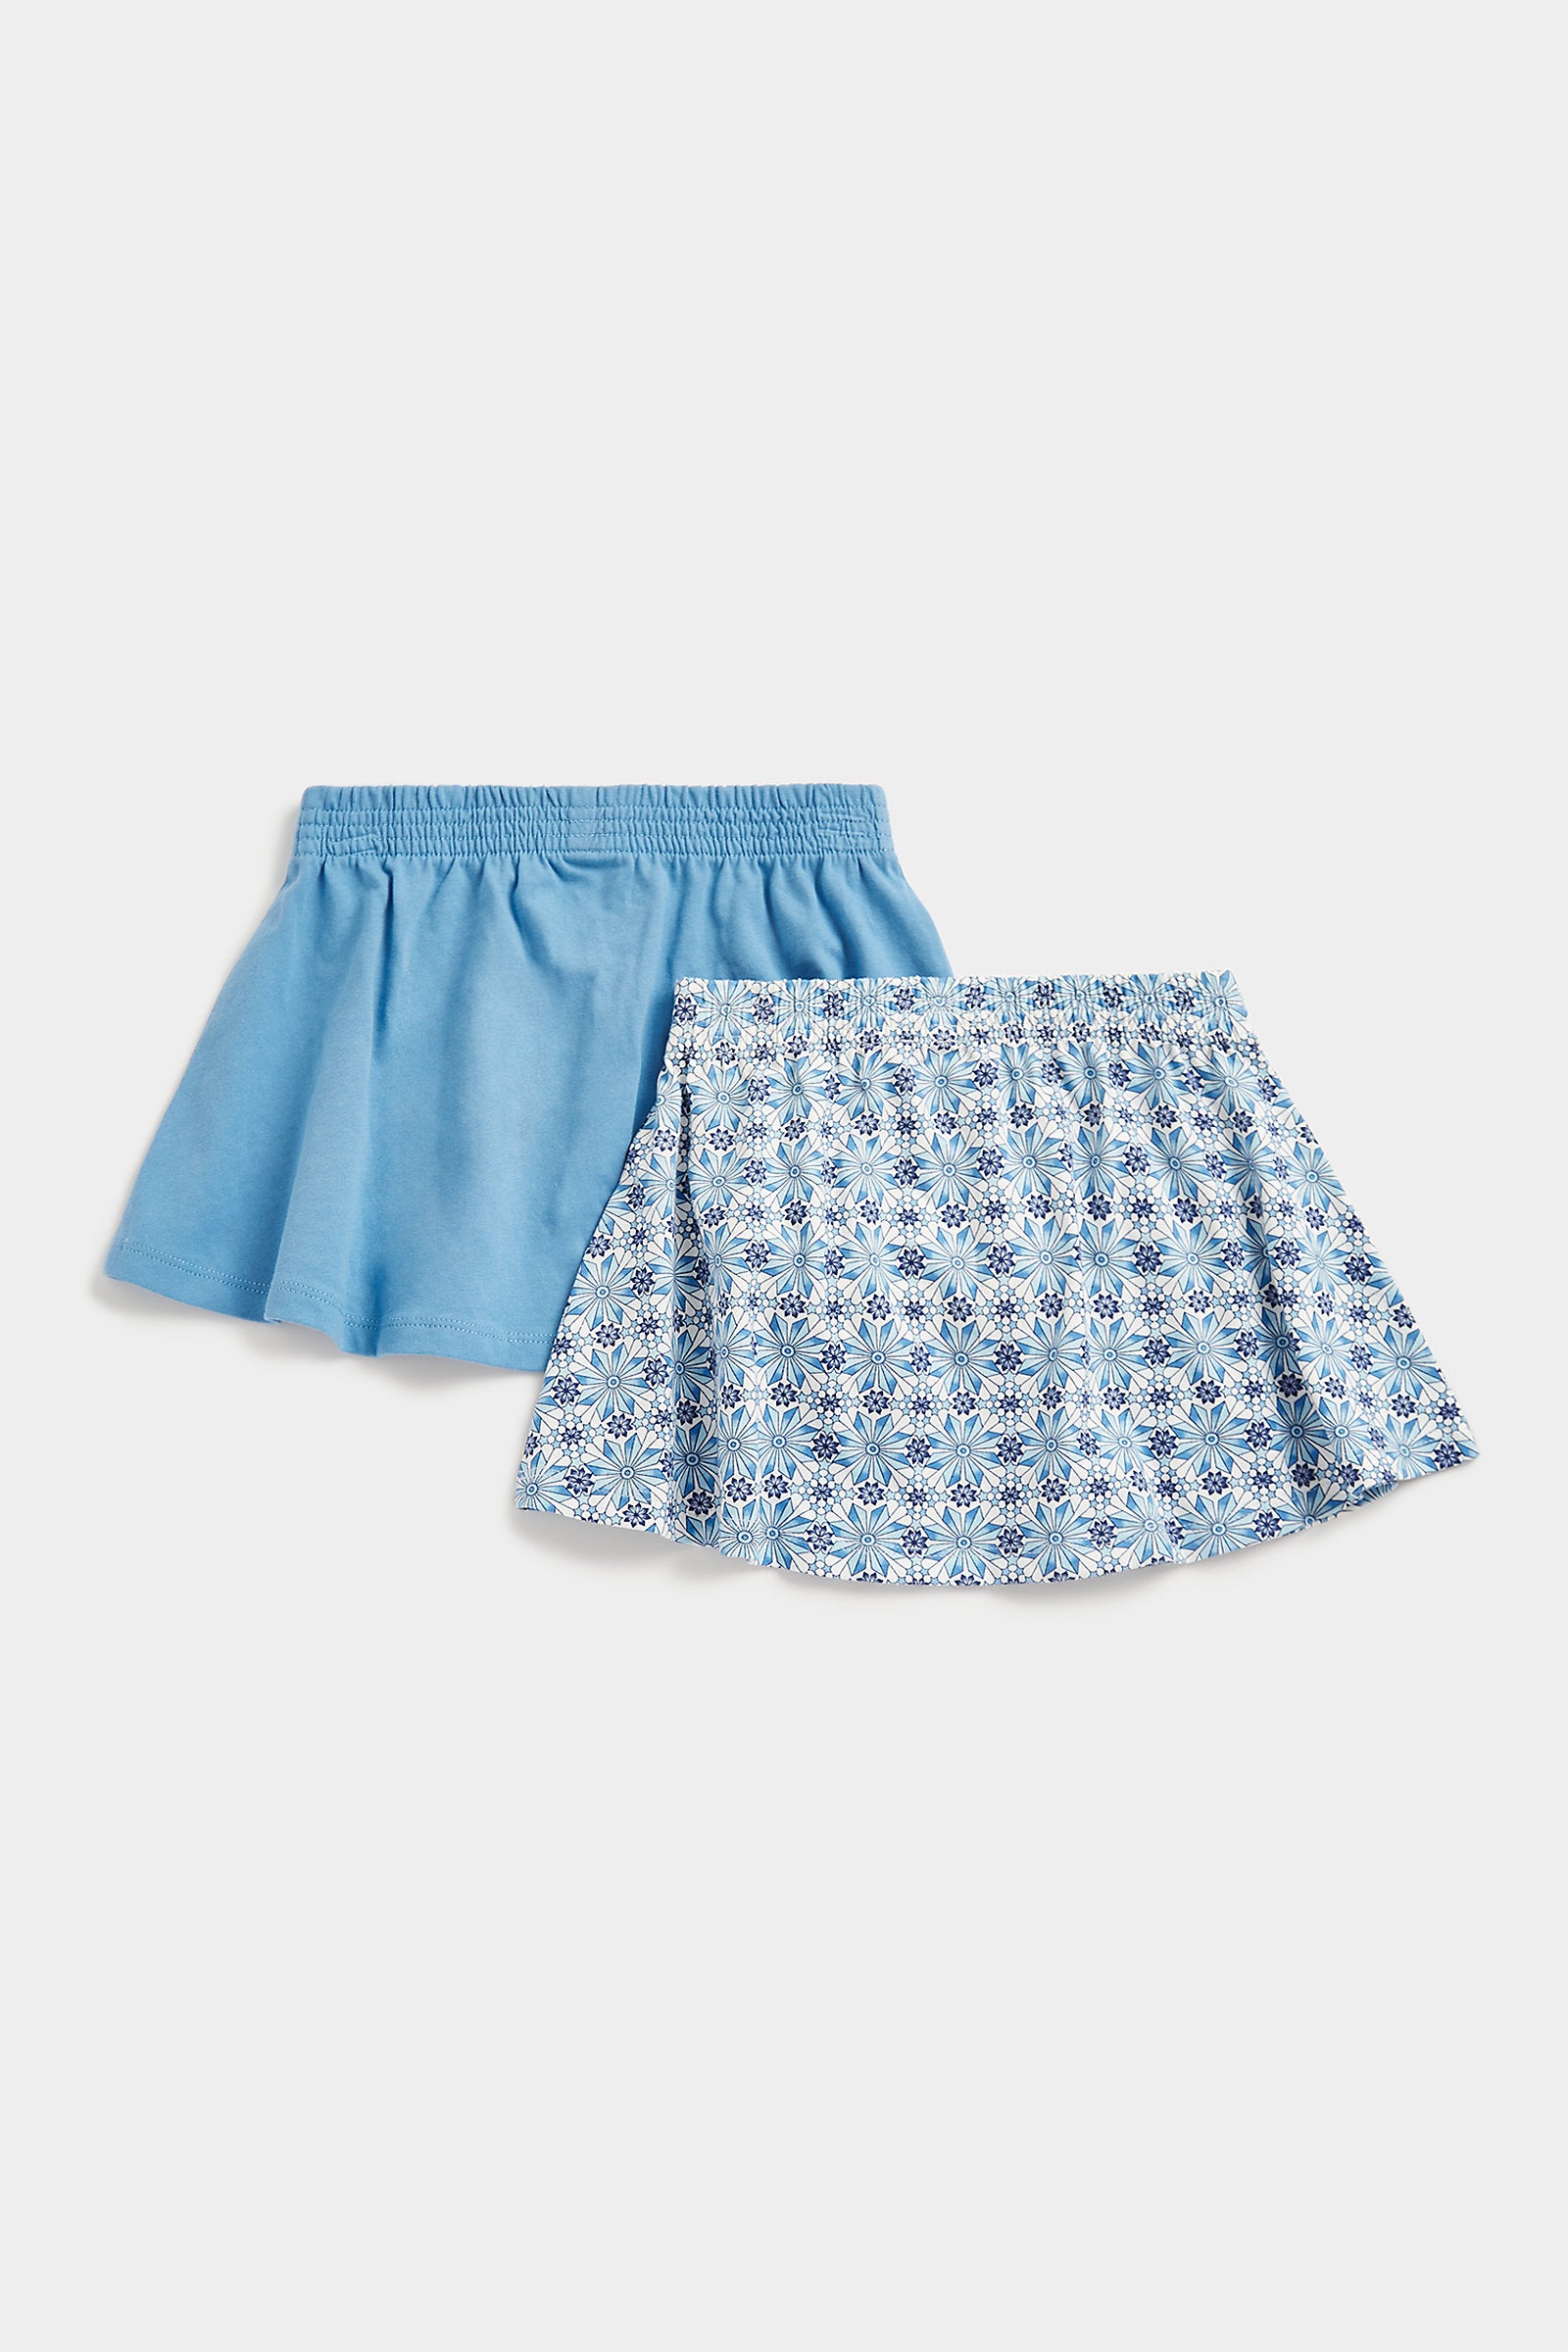 Mothercare Skirts - 2 Pack